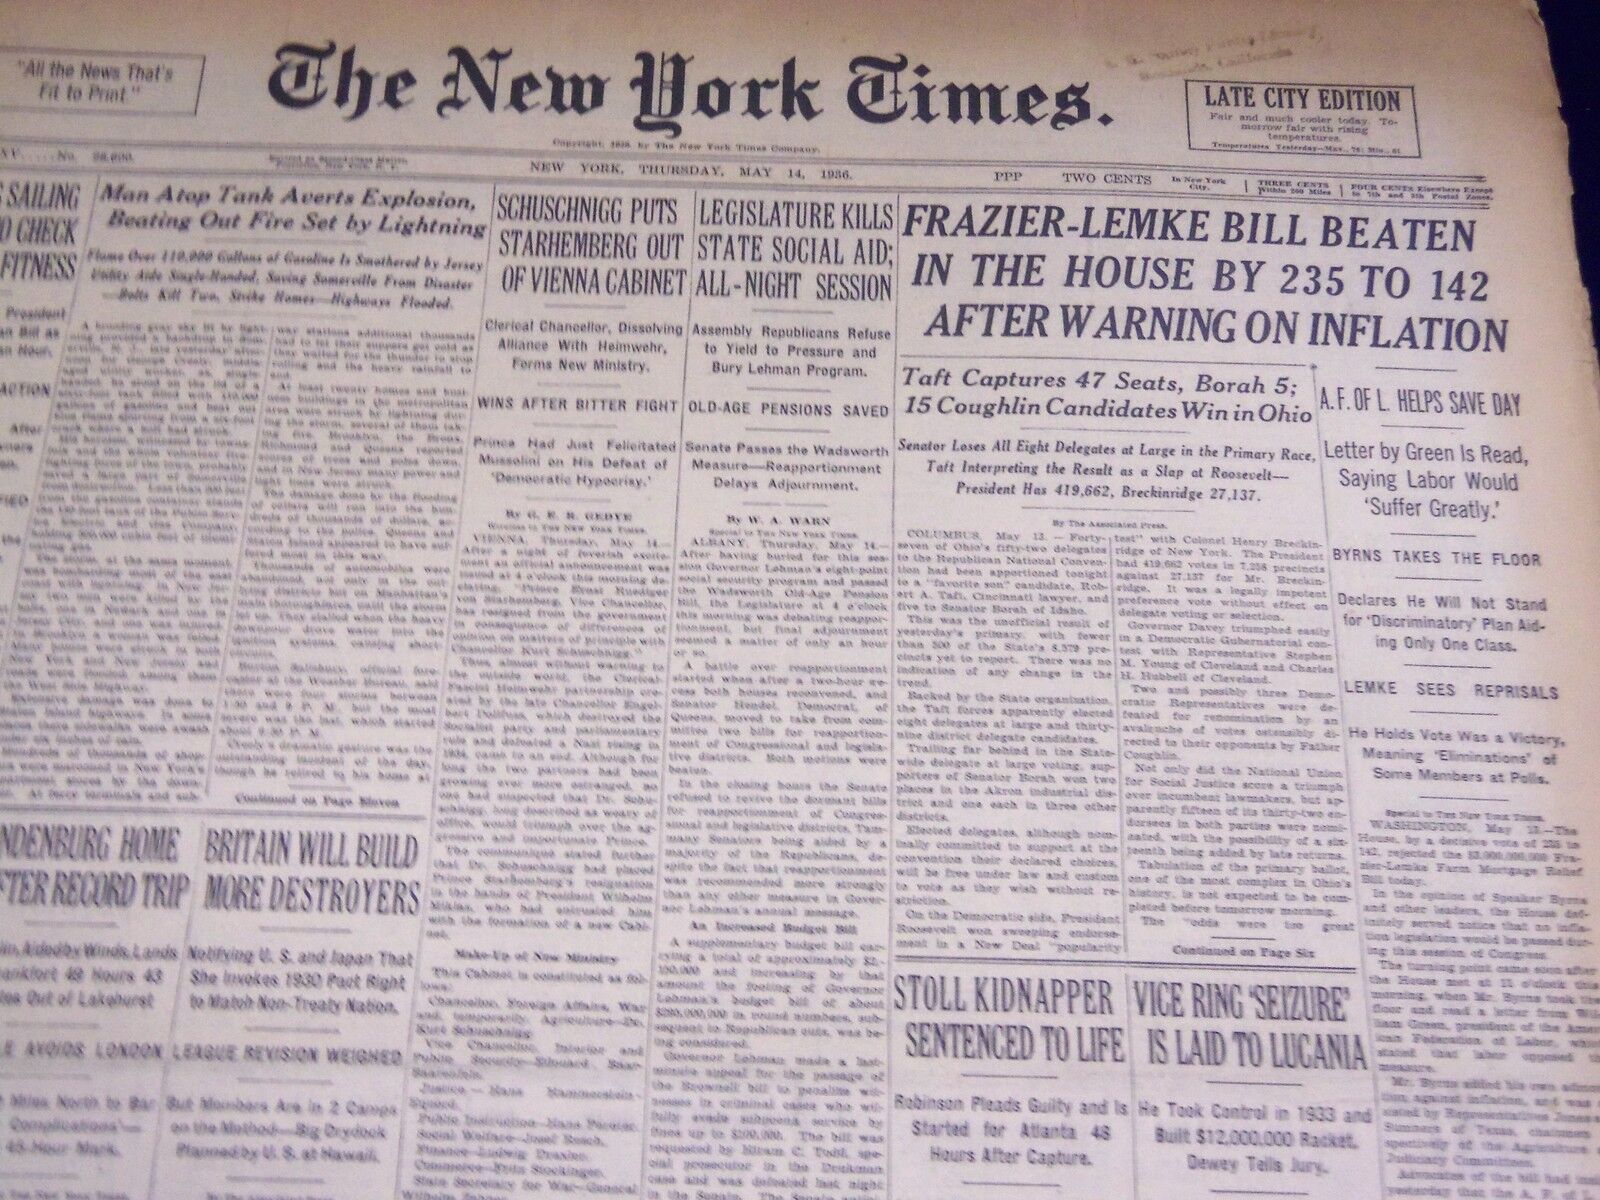 1936 MAY 14 NEW YORK TIMES - FRAZIER-LEMKE BILL BEATEN IN THE HOUSE - NT 2116